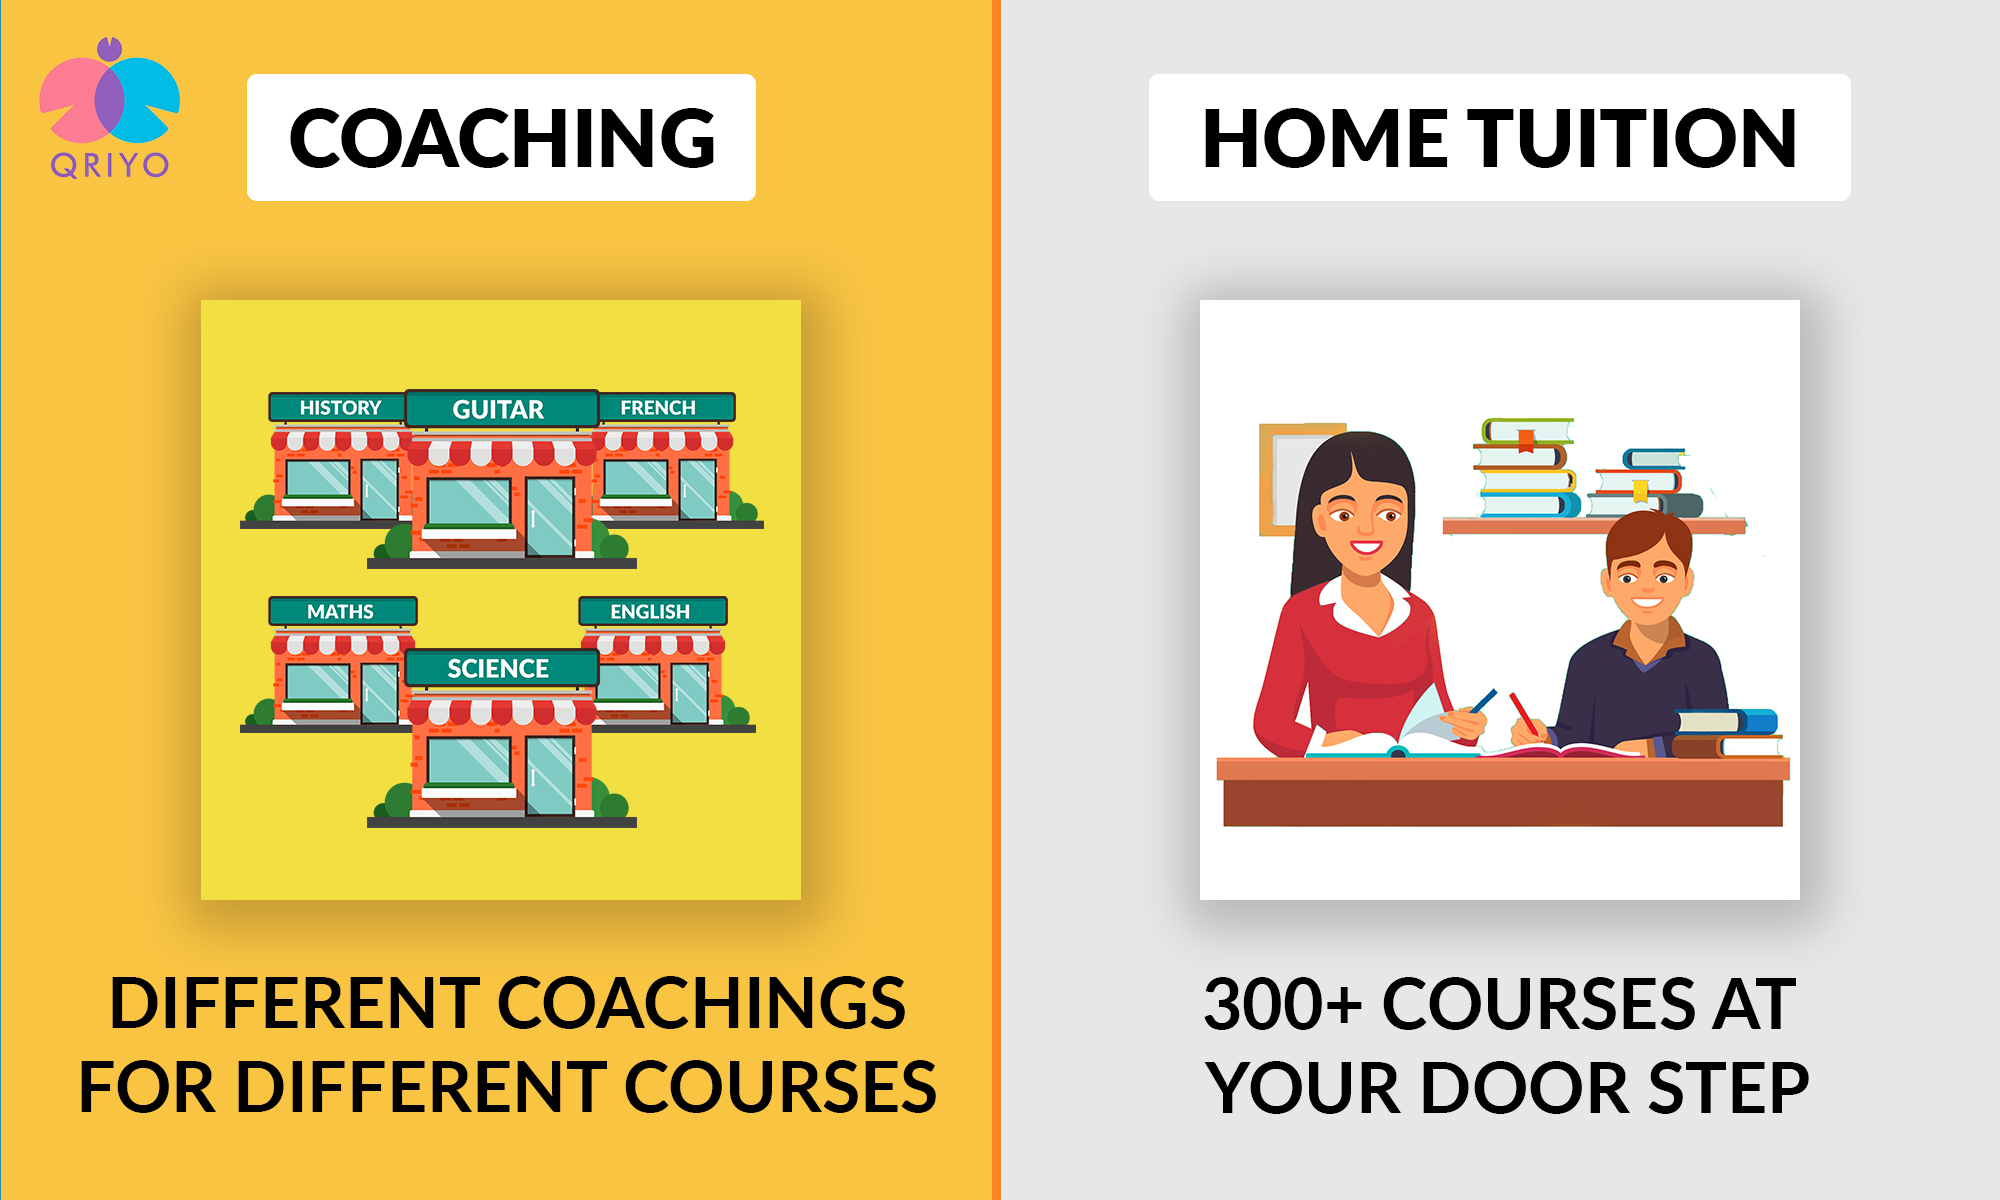 Qriyo provides all courses at your home.